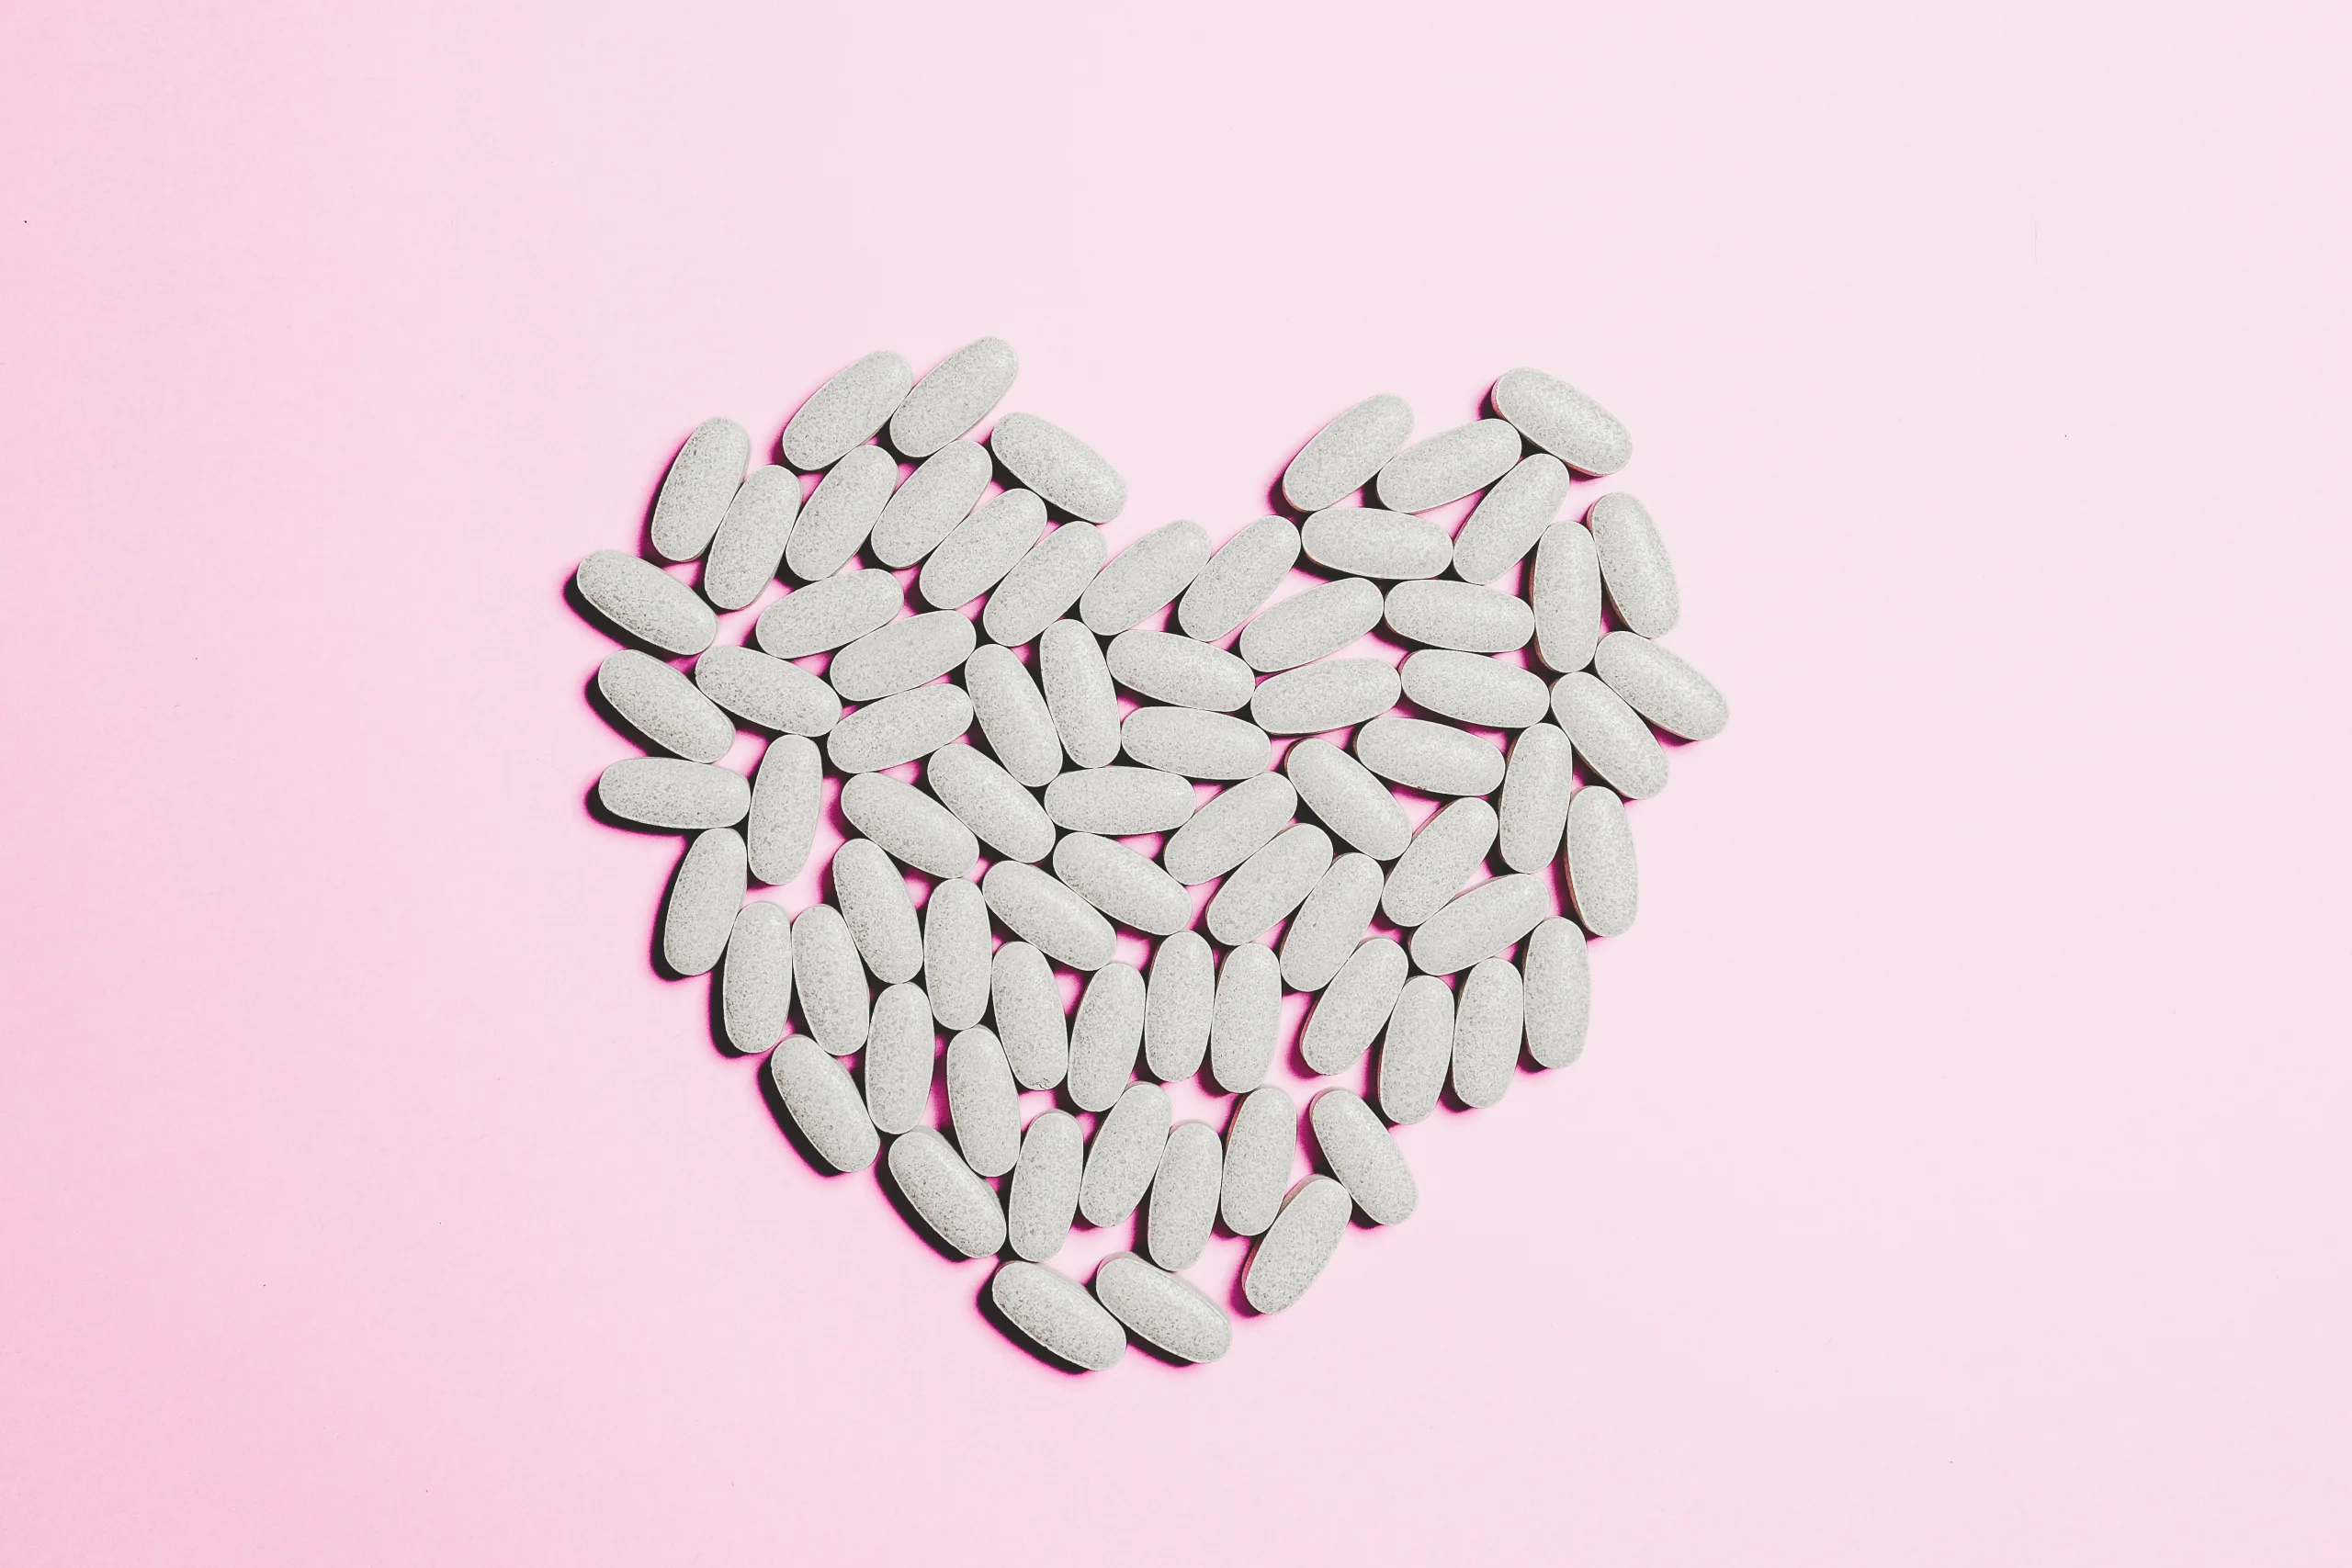 table of medicines shaped as heart